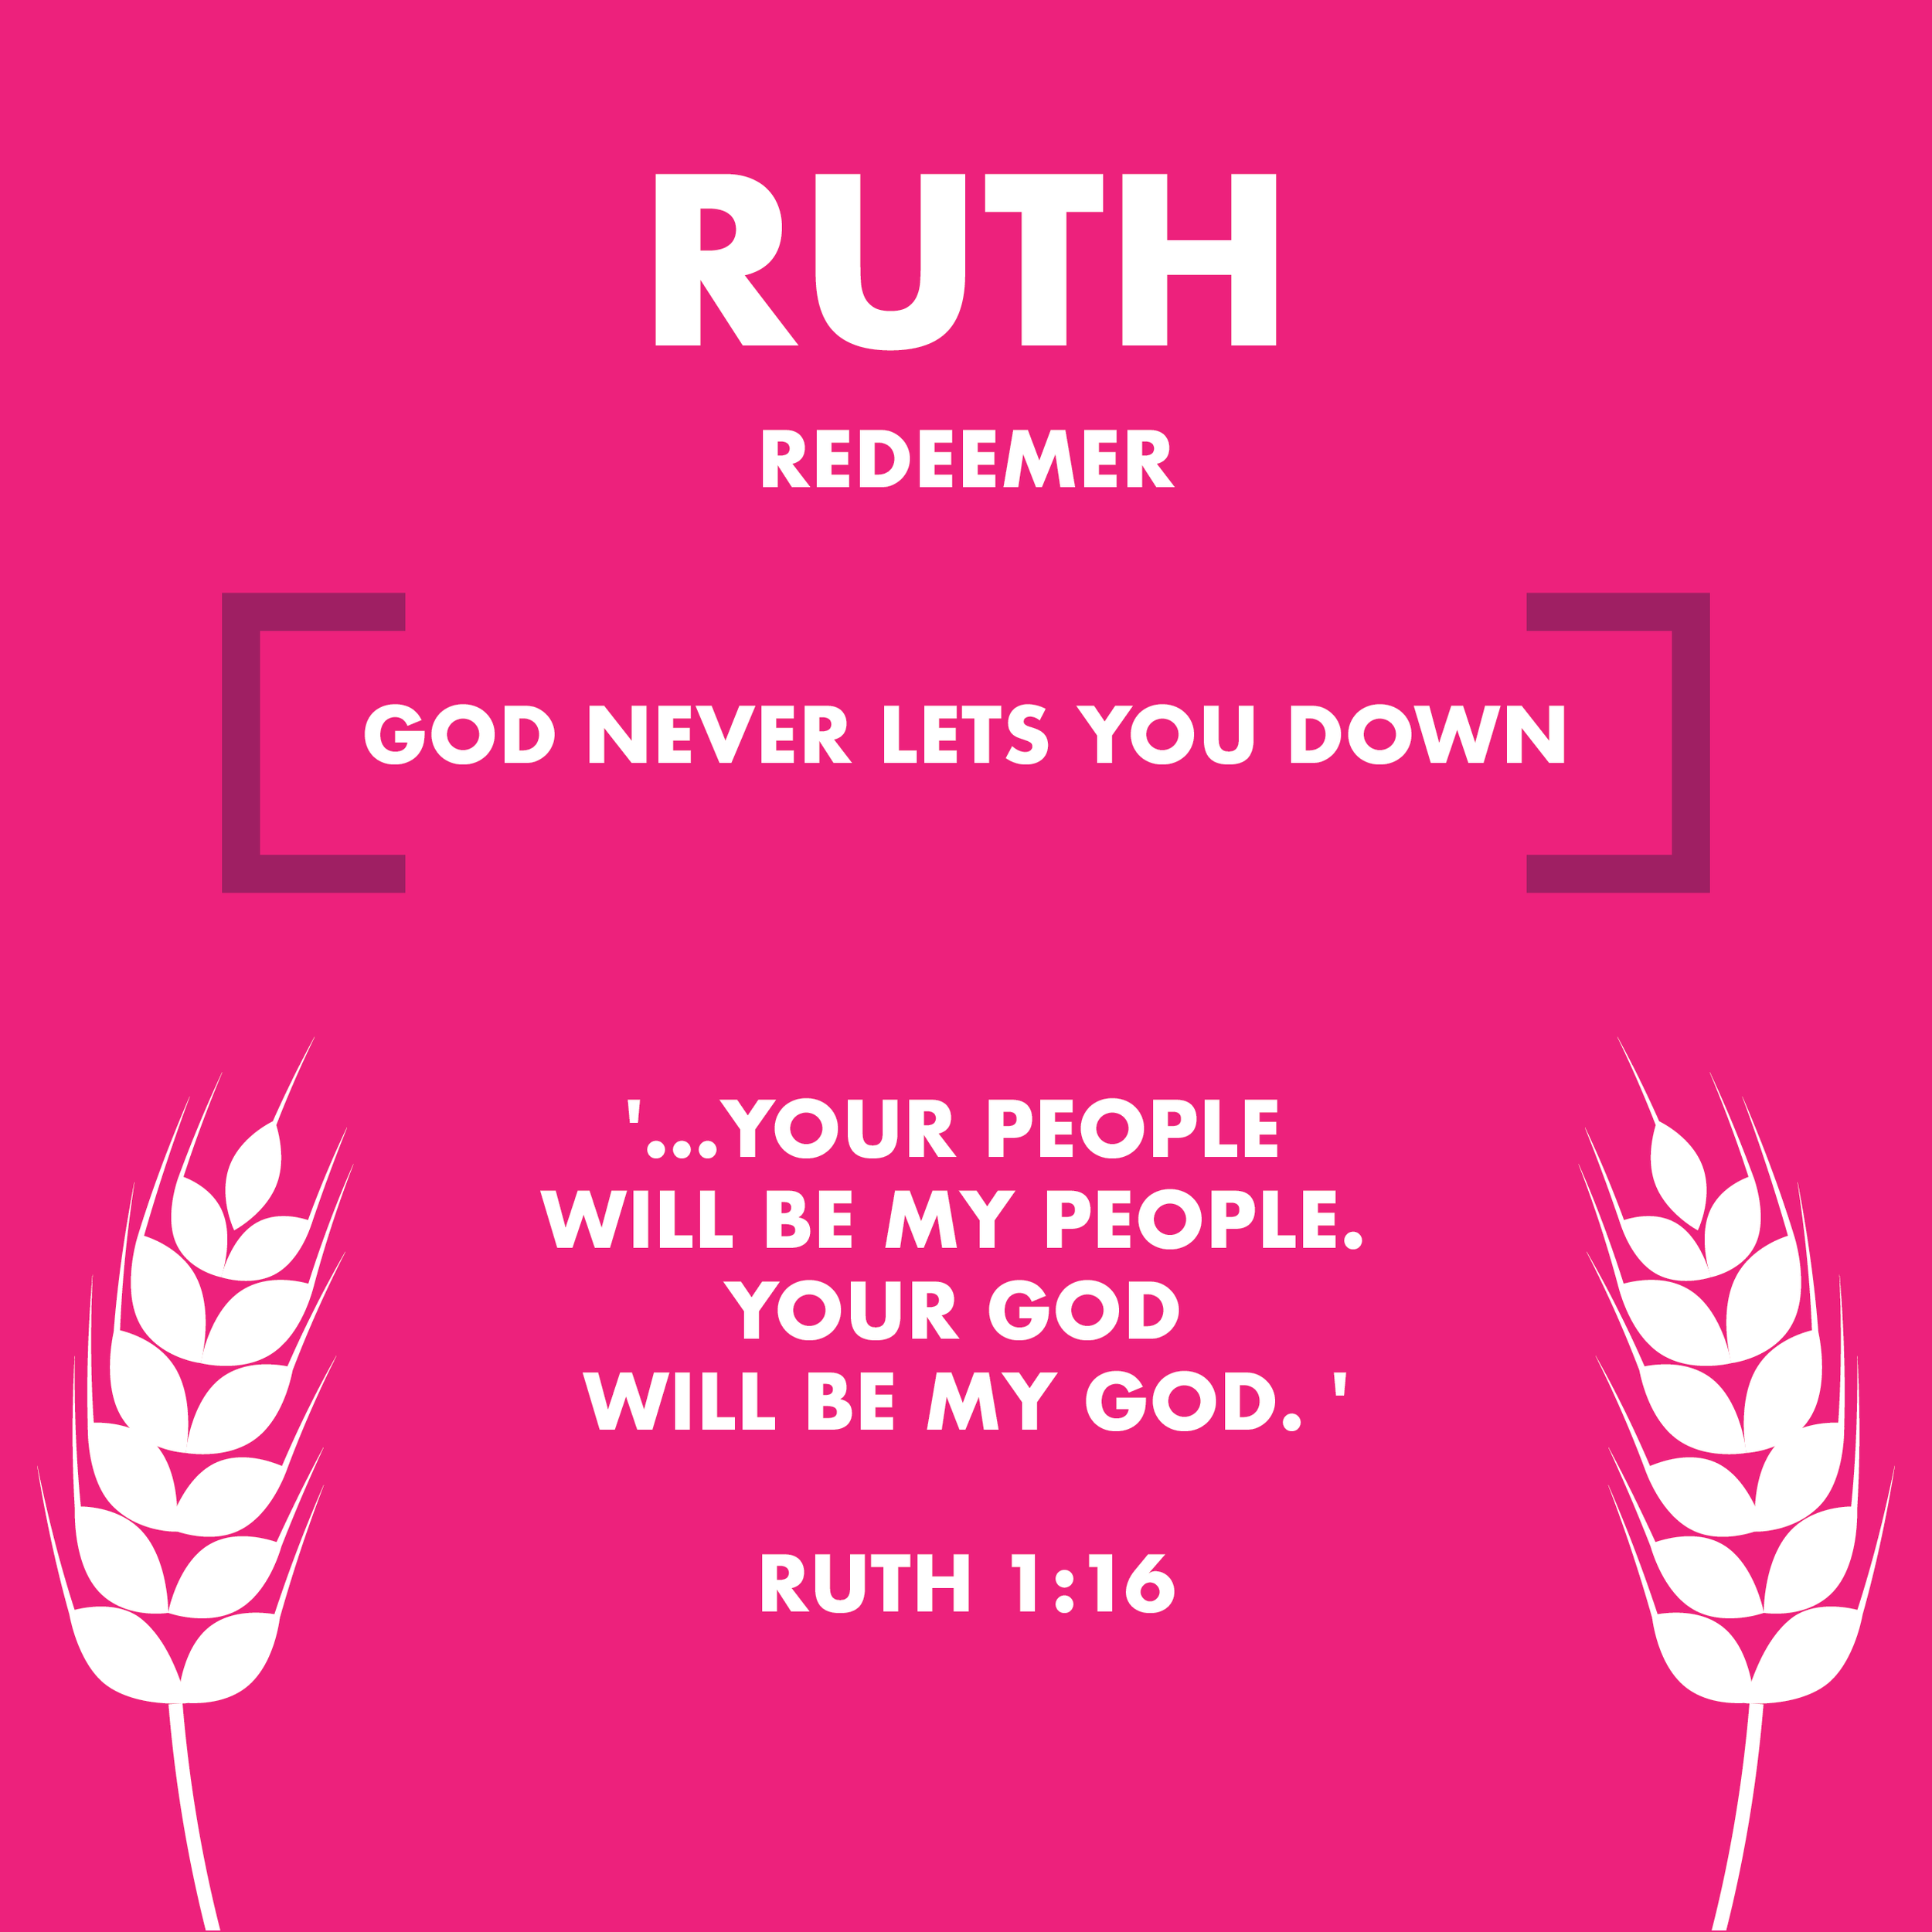 Books of the Bible_posters_08 Ruth.png